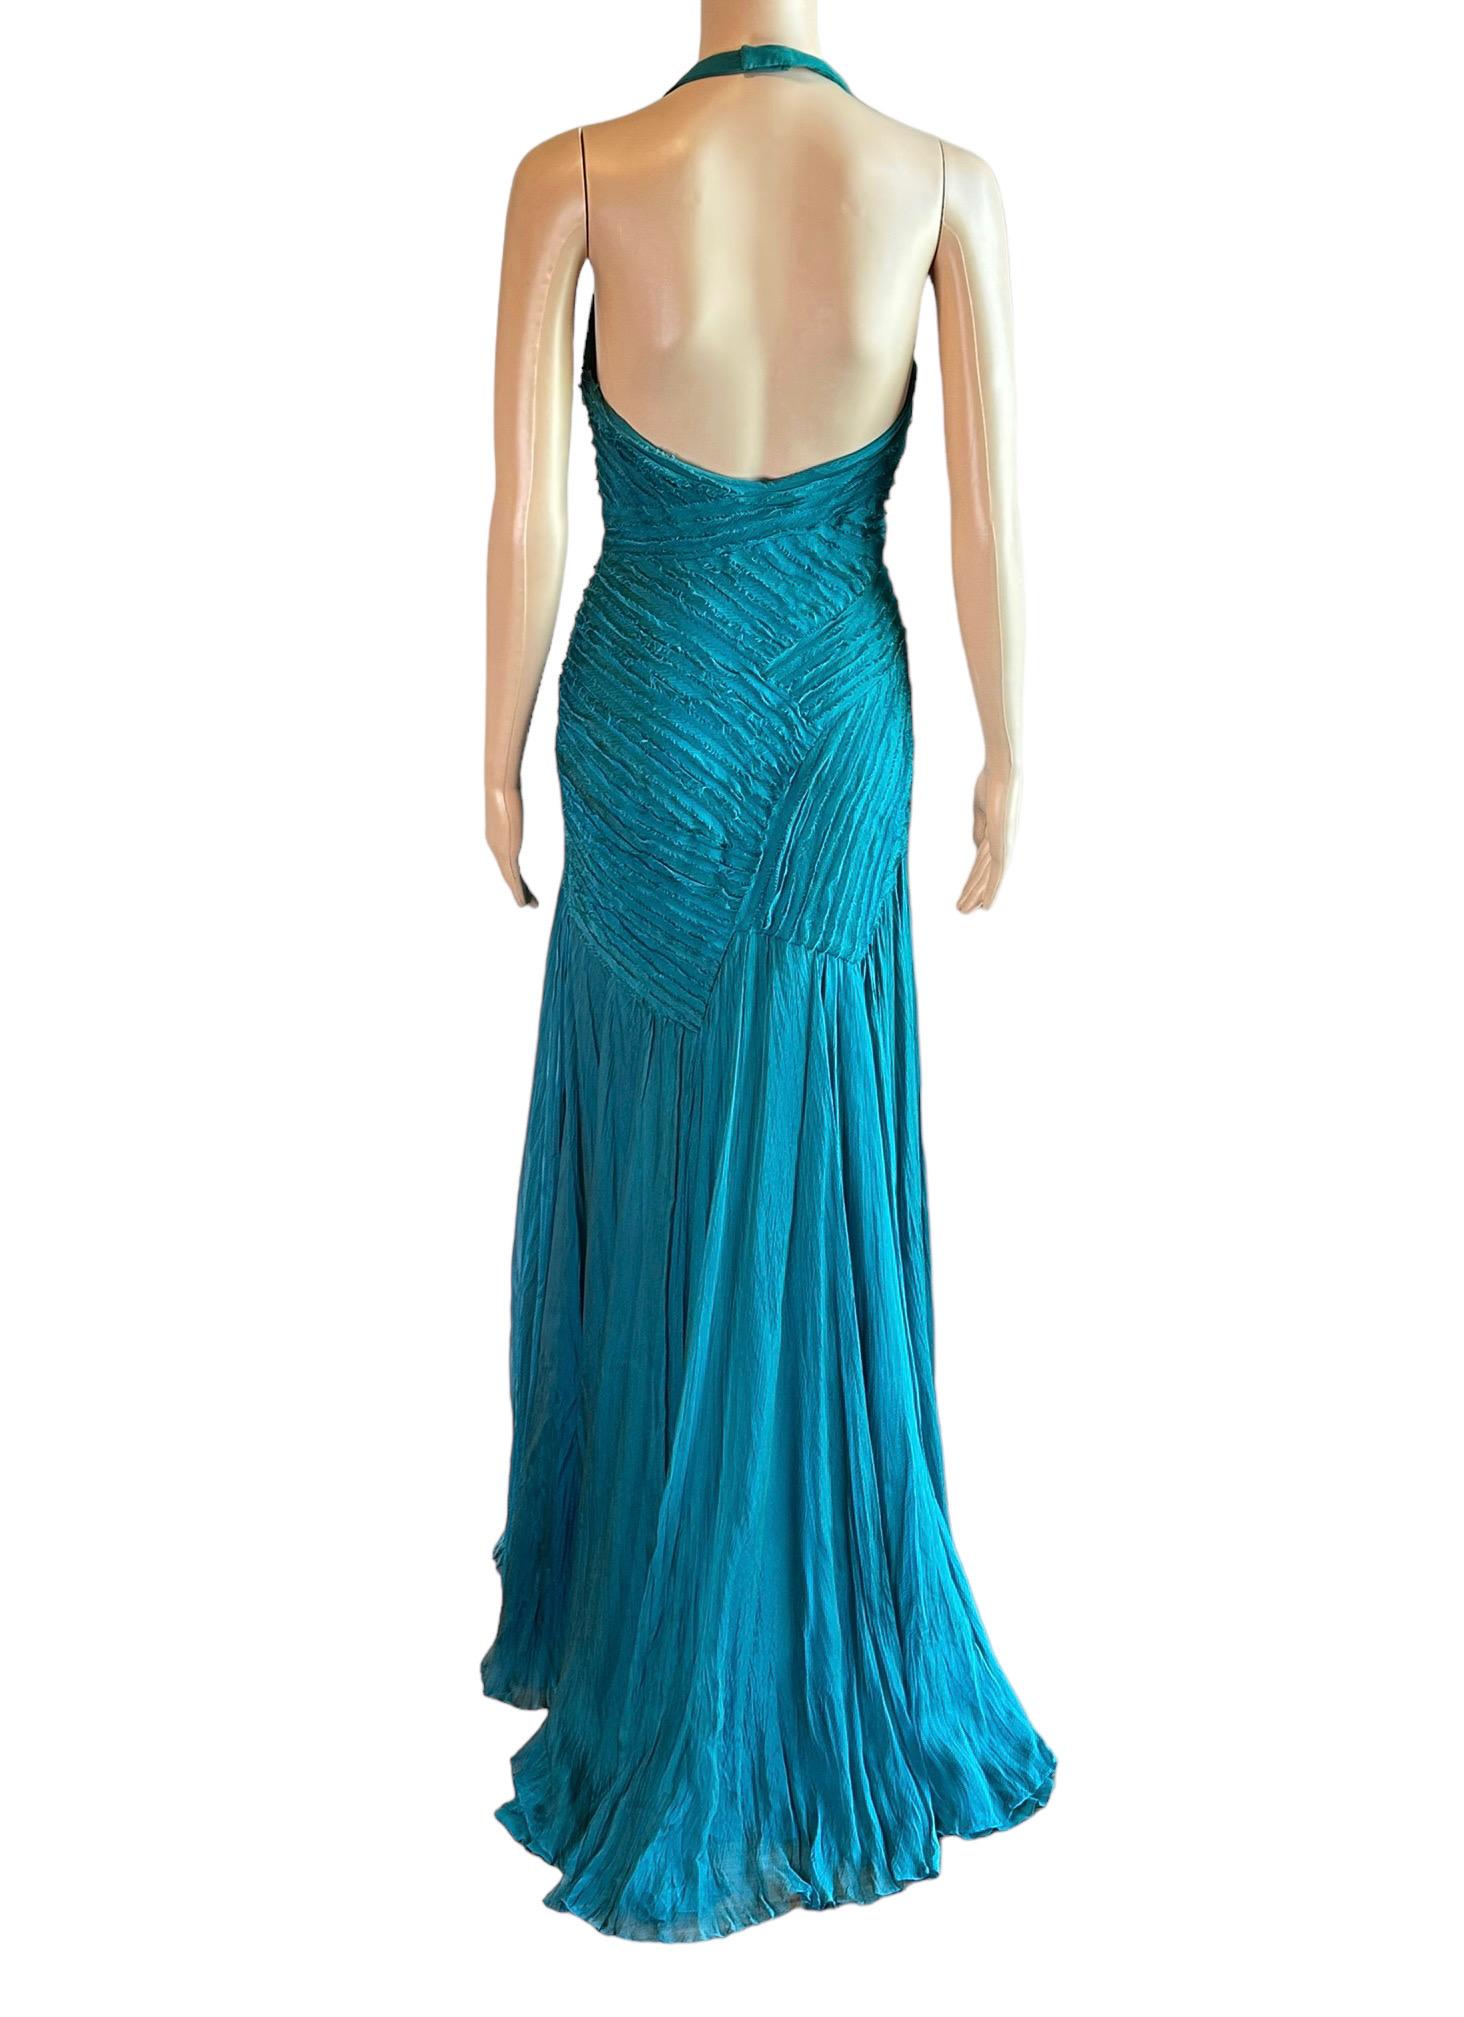 Versace F/W 2005 Runway Campaign Halter High Slit Slip Evening Dress Gown  For Sale 6